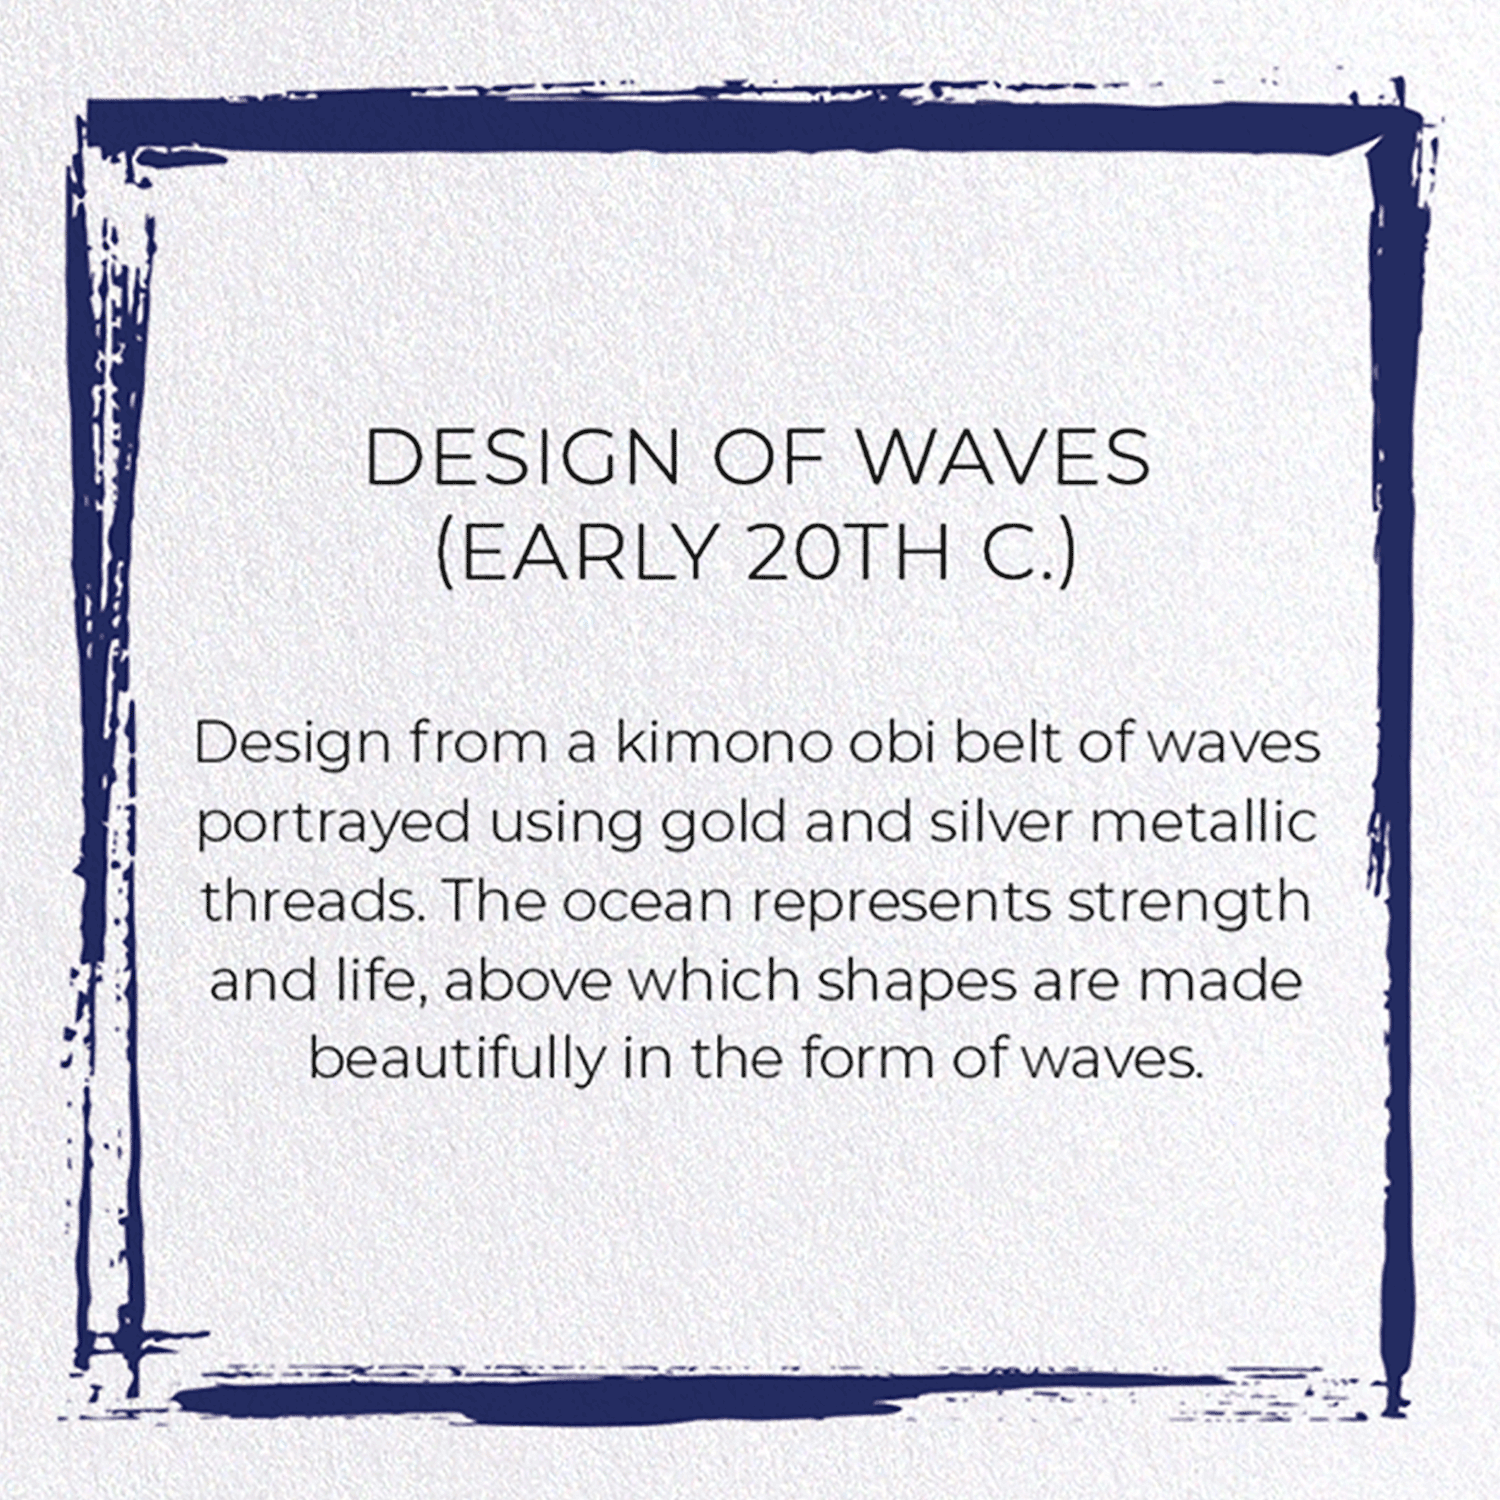 DESIGN OF WAVES (EARLY 20TH C.): Pattern Greeting Card